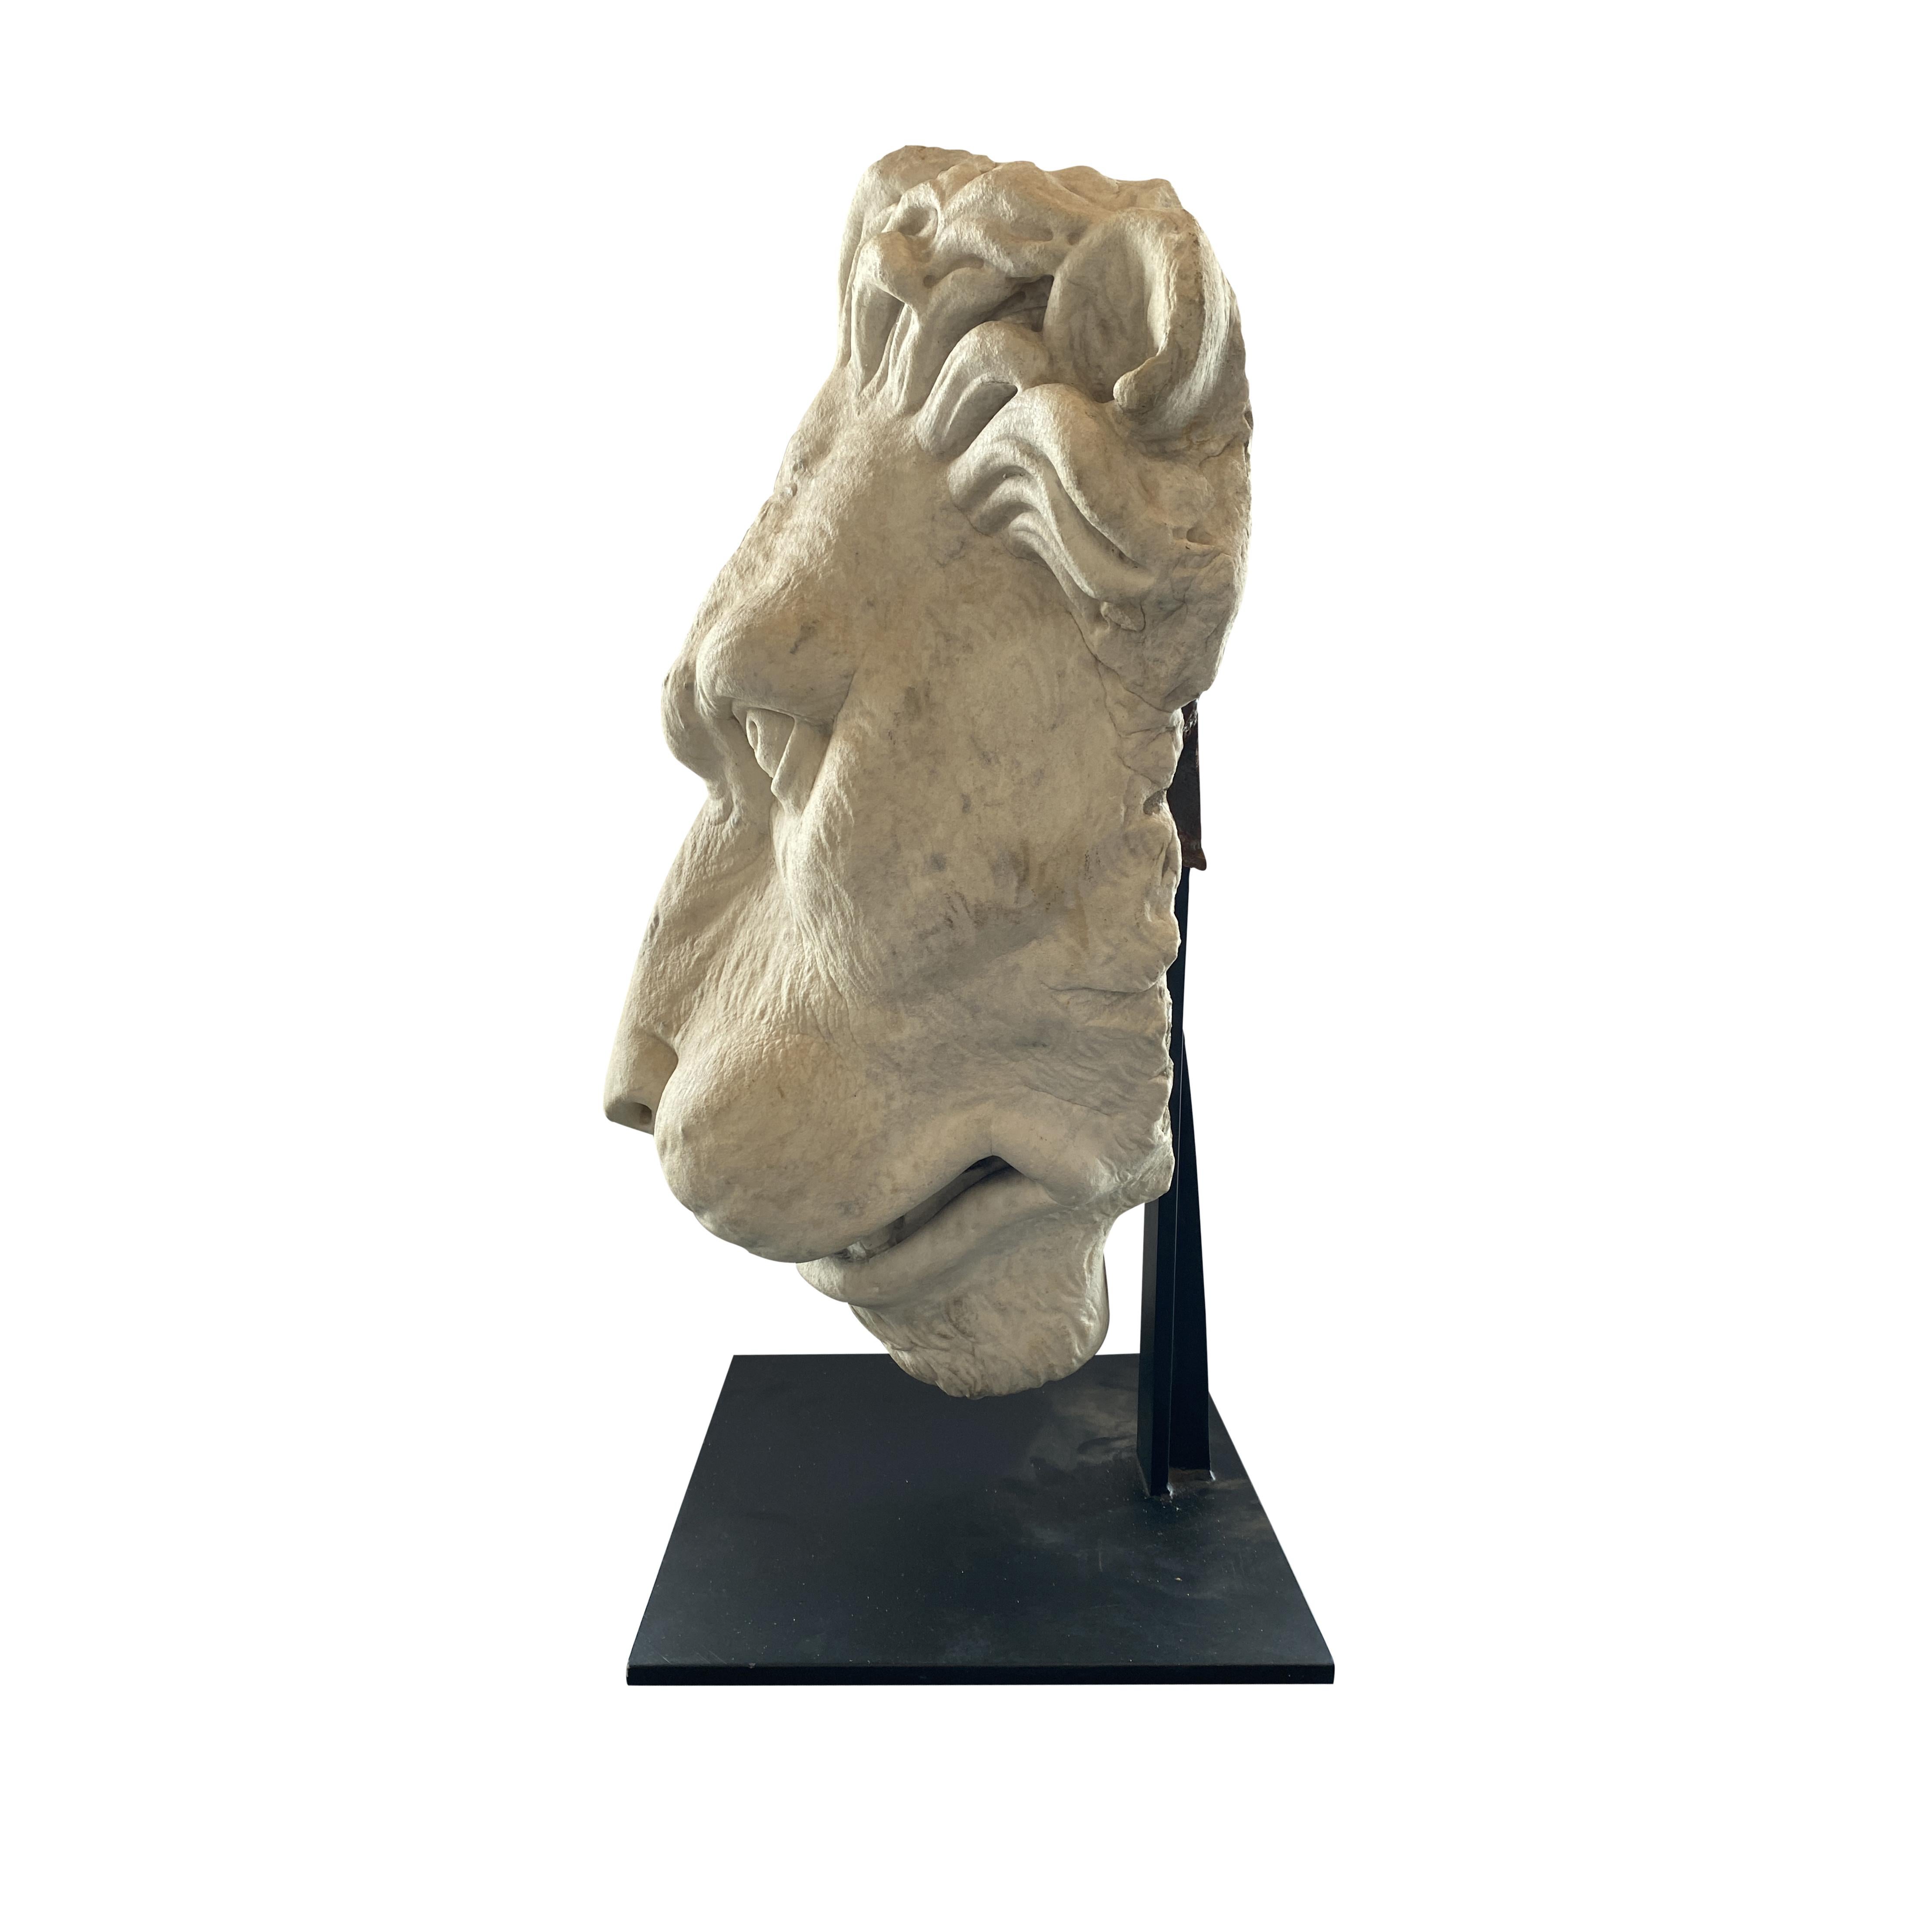 Magnificent hand carved Carrara marble sculpture of a lioness head from Rome. Mounted on a metal base. Base 13.75